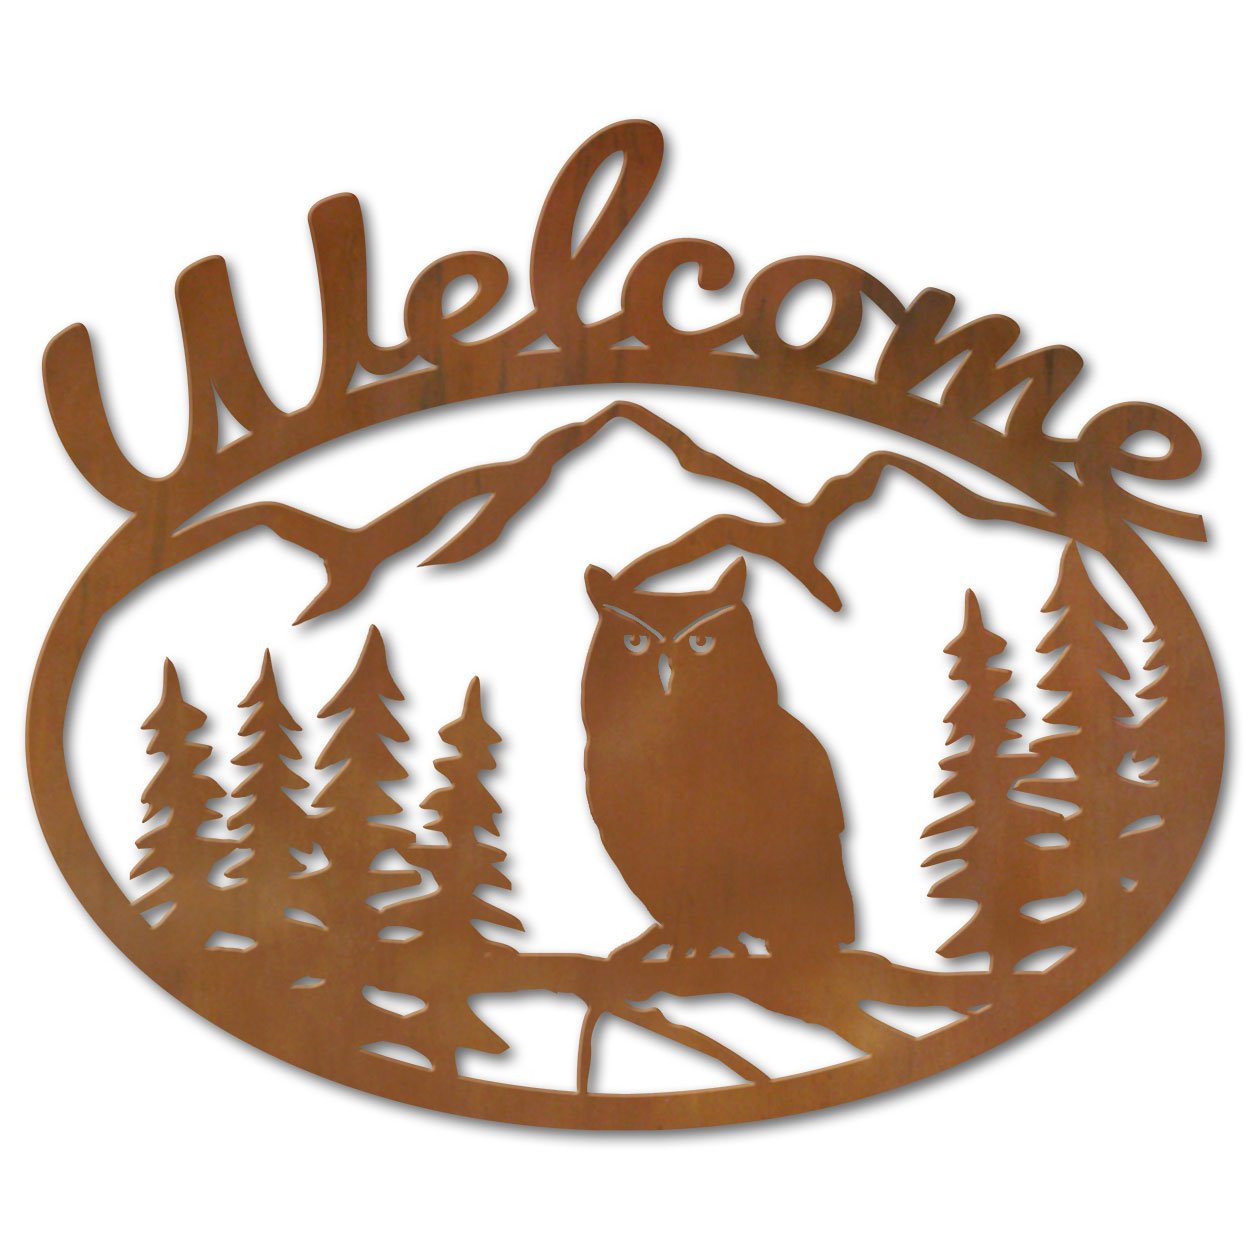 600220 - Owl in Tree Metal Welcome Sign Wall Art